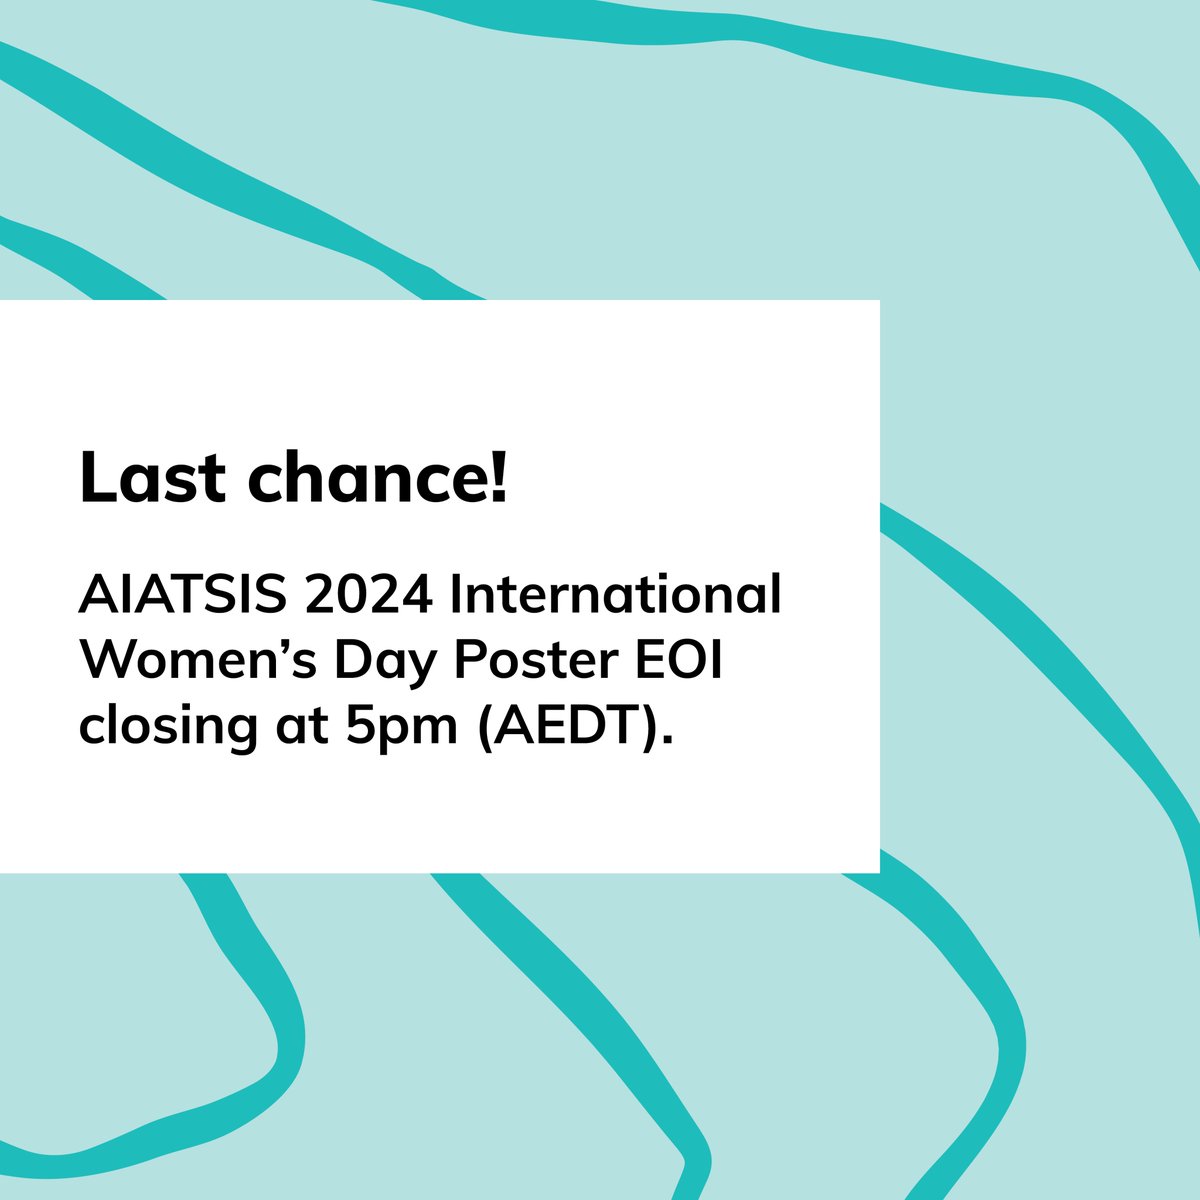 Closing today! The AIATSIS 2024 International Women’s Day Poster EOI closes today. Thank you to all the deadly artists who have submitted so far, and if you haven’t submitted yet you still have time! Submissions open until 5pm (AEDT) today. aiatsis.gov.au/whats-new/news…